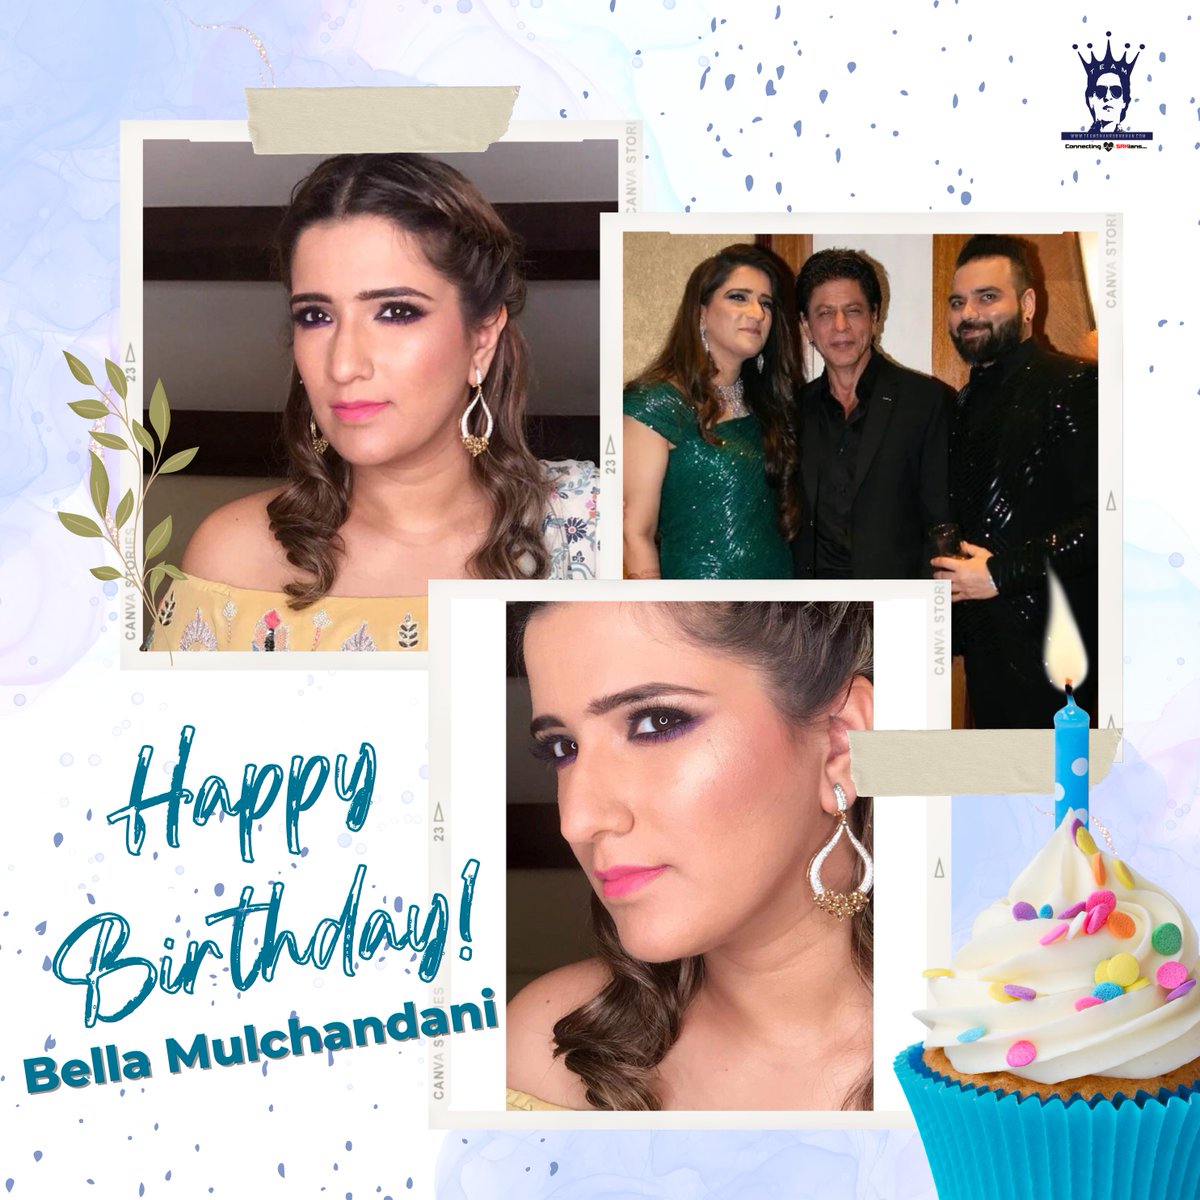 Here's wishing @8ellaM ma'am a very Happy Birthday. May you have all the love and happiness you bring to others. #happybirthday #happybirthdaybella #ShahRukhKhan #TeamShahRukhKhan